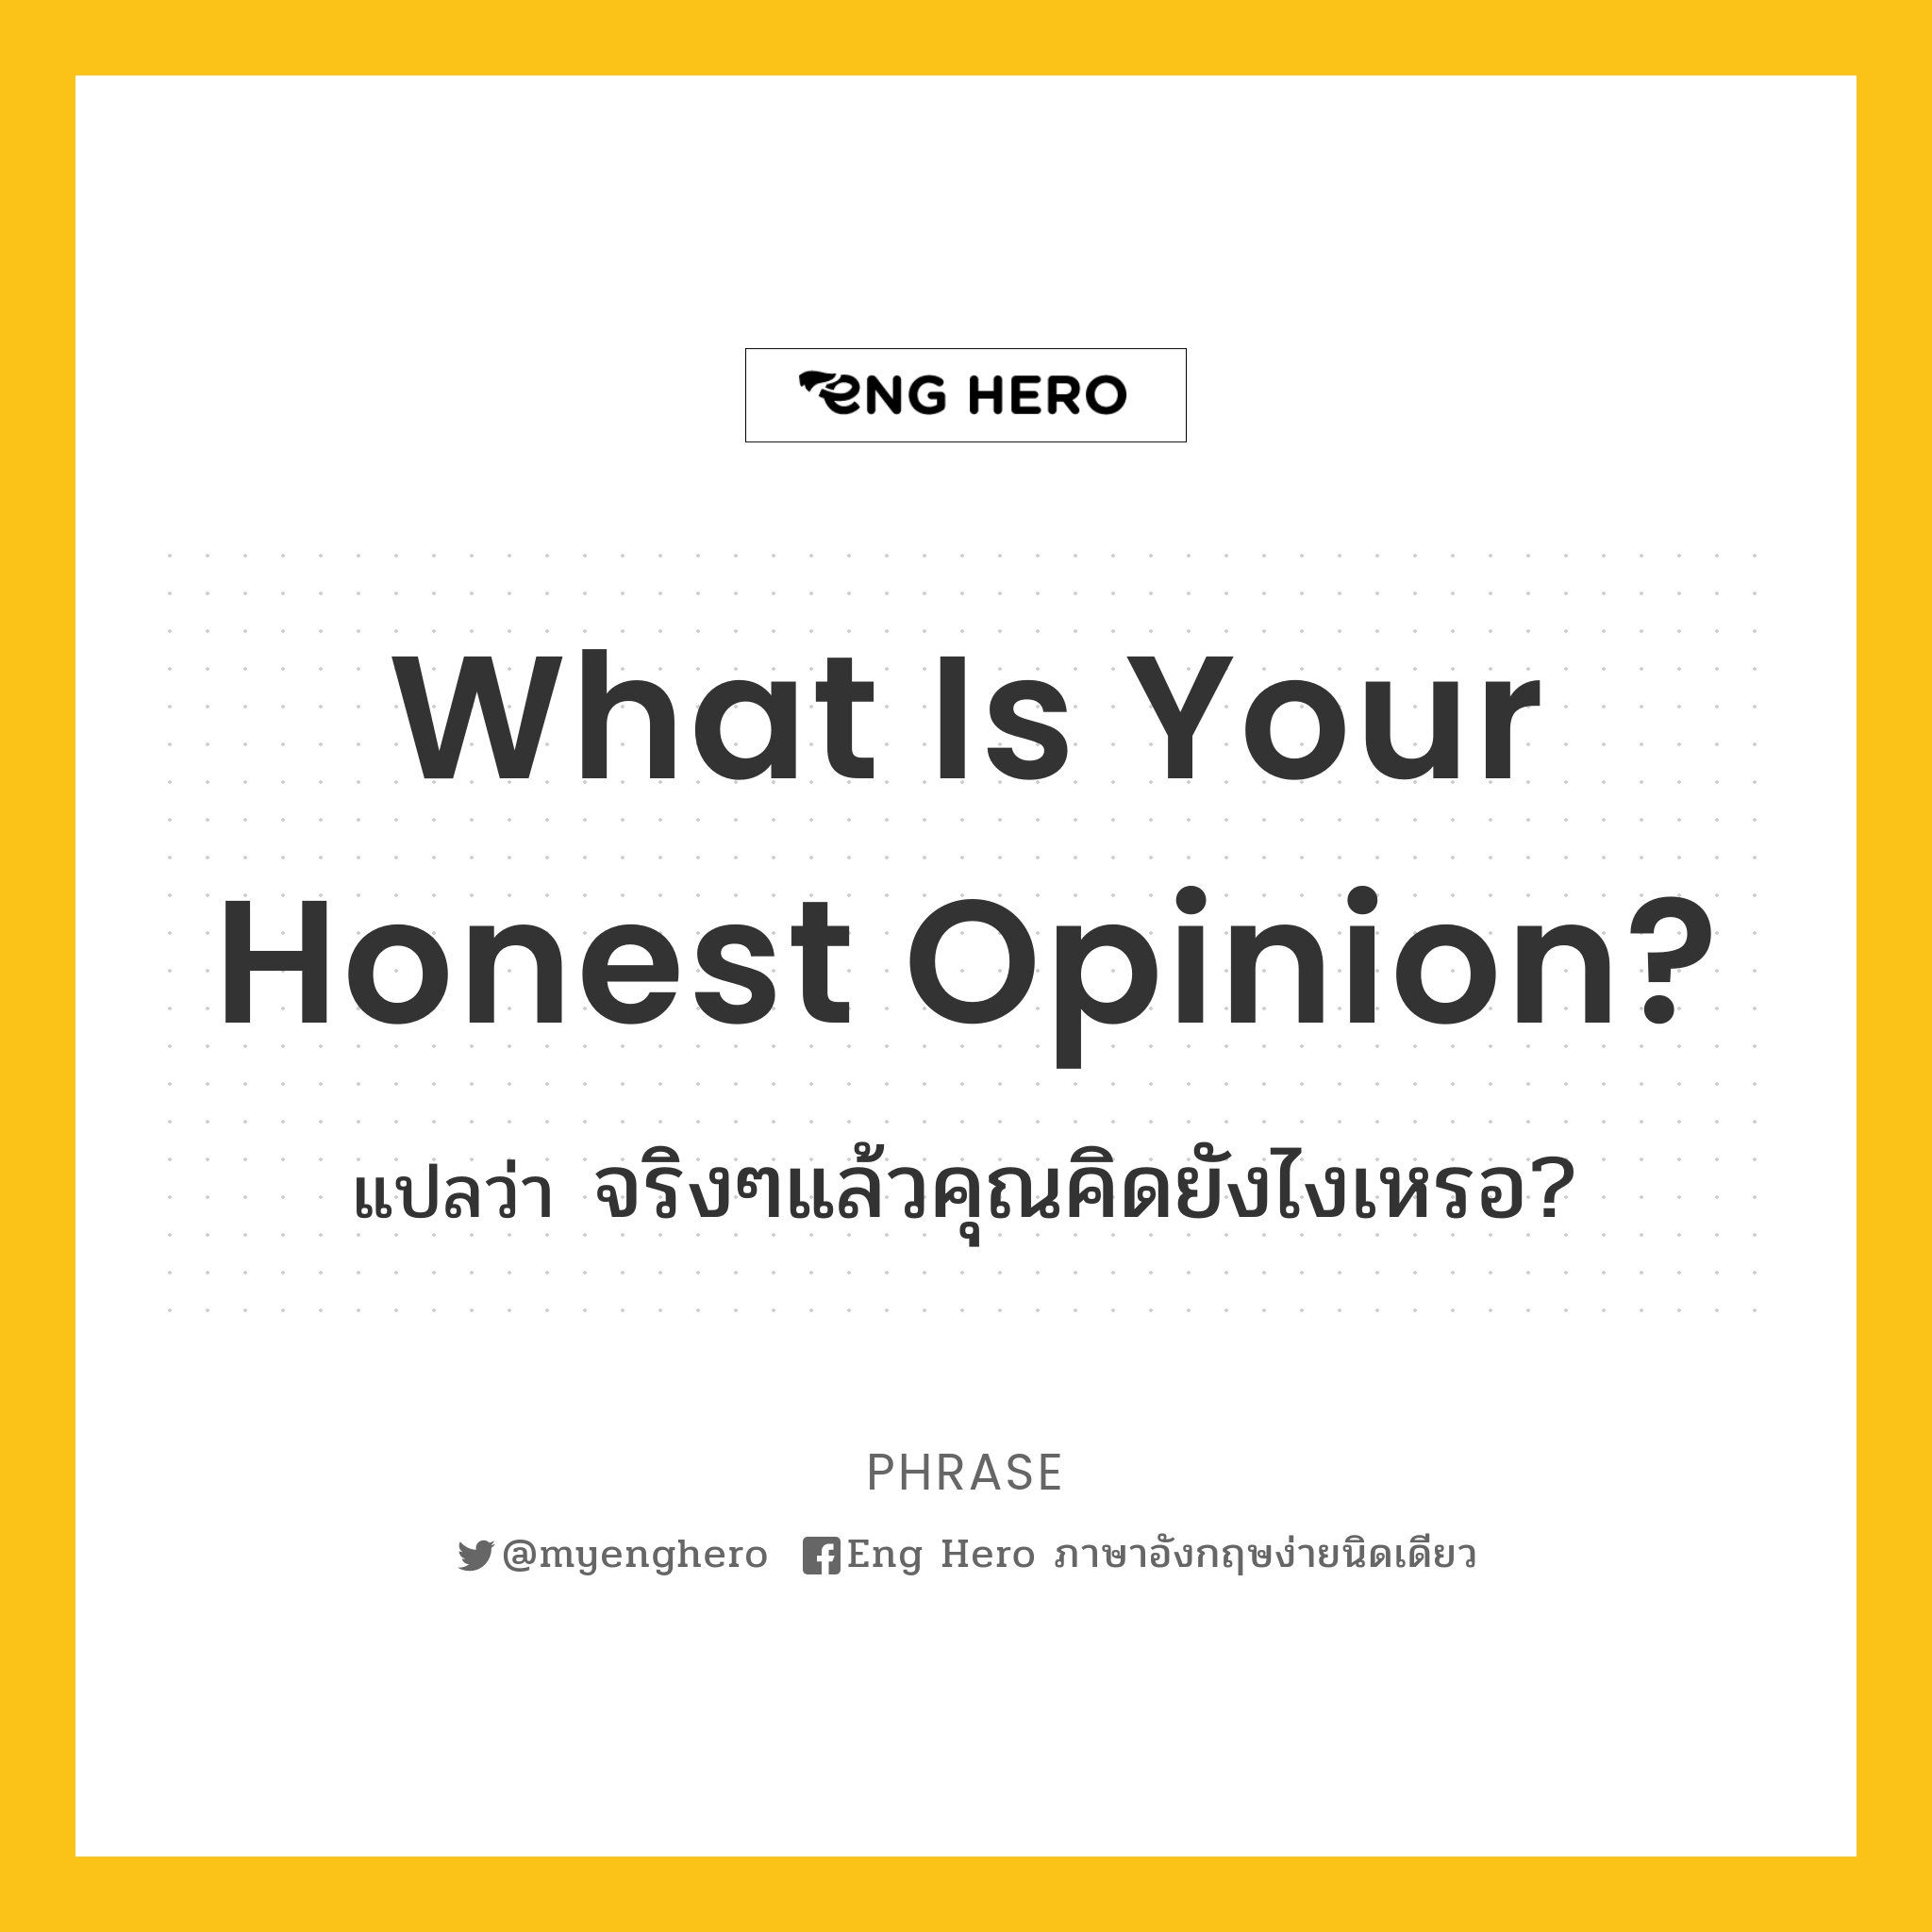 What is your honest opinion?